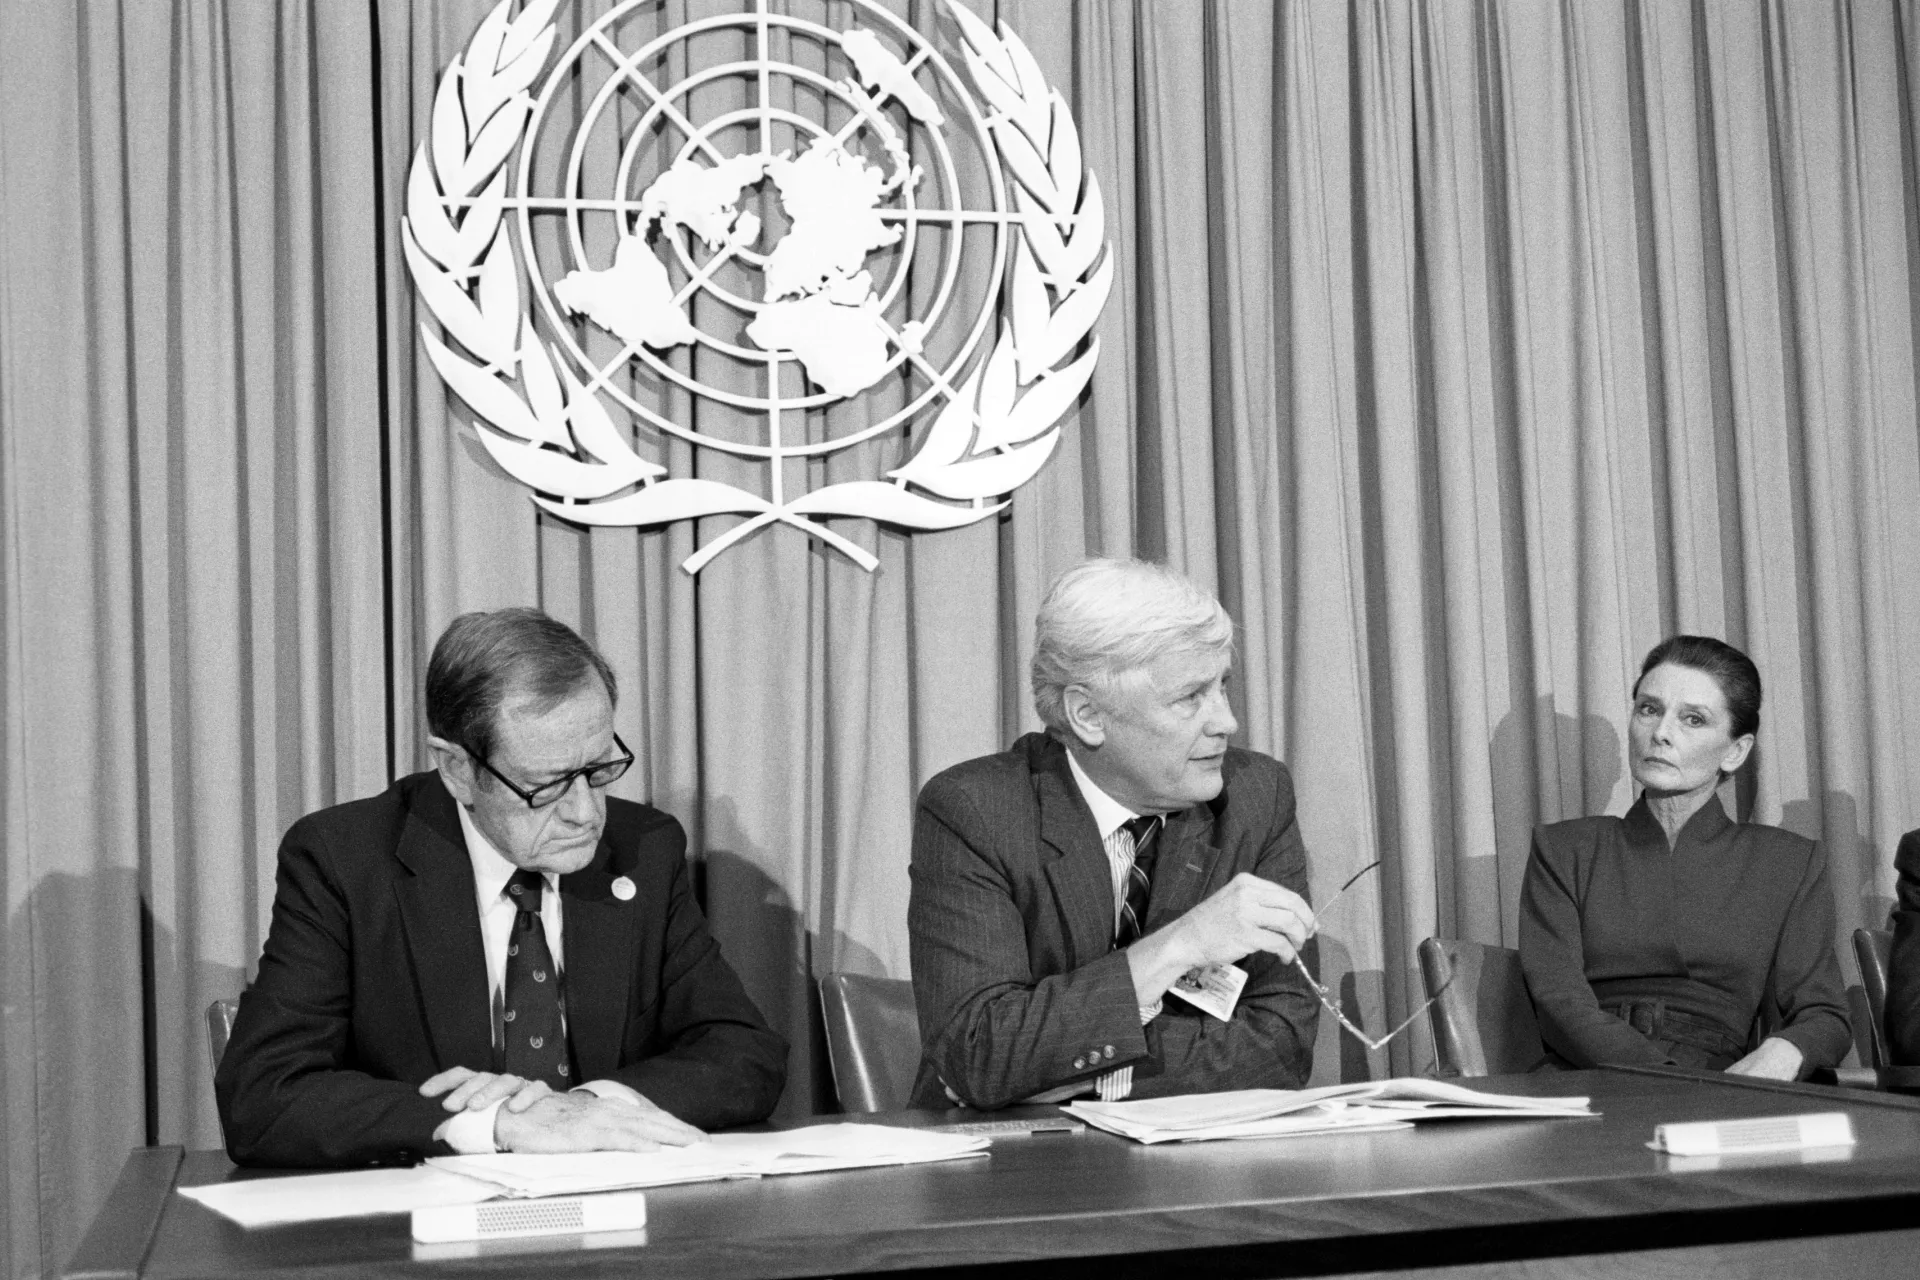  UNICEF held a press conference as the General Assembly adopts a United Nations Convention on the Rights of the Child. From left to right are James Grant (executive Director (UNICEF), Jan Martenson (Under-Secretary-General for Human Rights and Director, United Nations, Geneva) and Audrey Hepburn (Goodwill Ambassador of UNICEF).